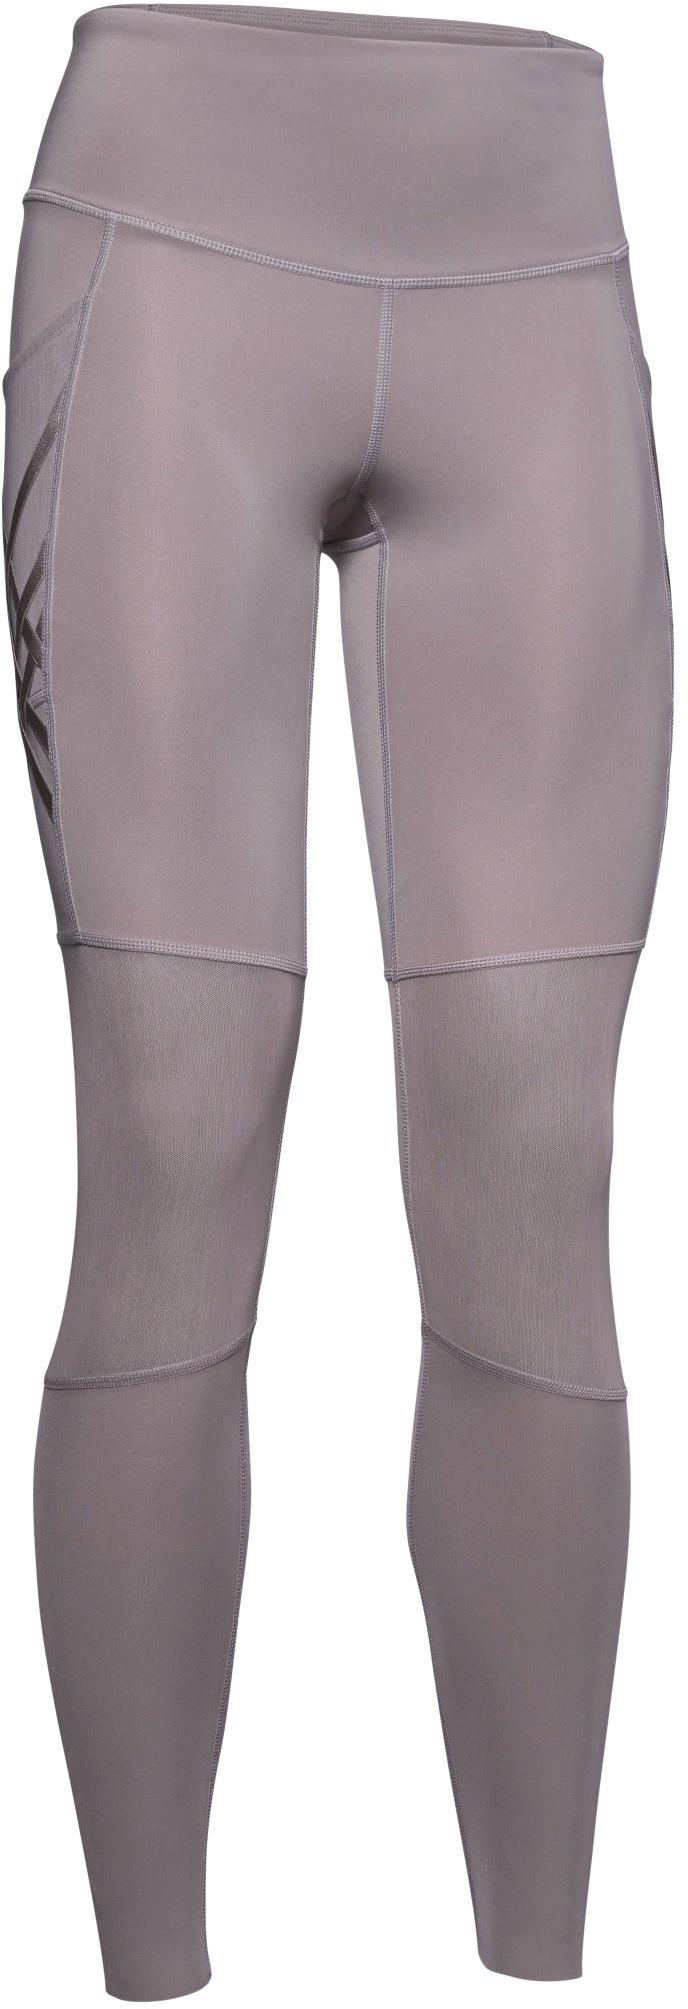 Under Armour Misty Legging-GRY XS